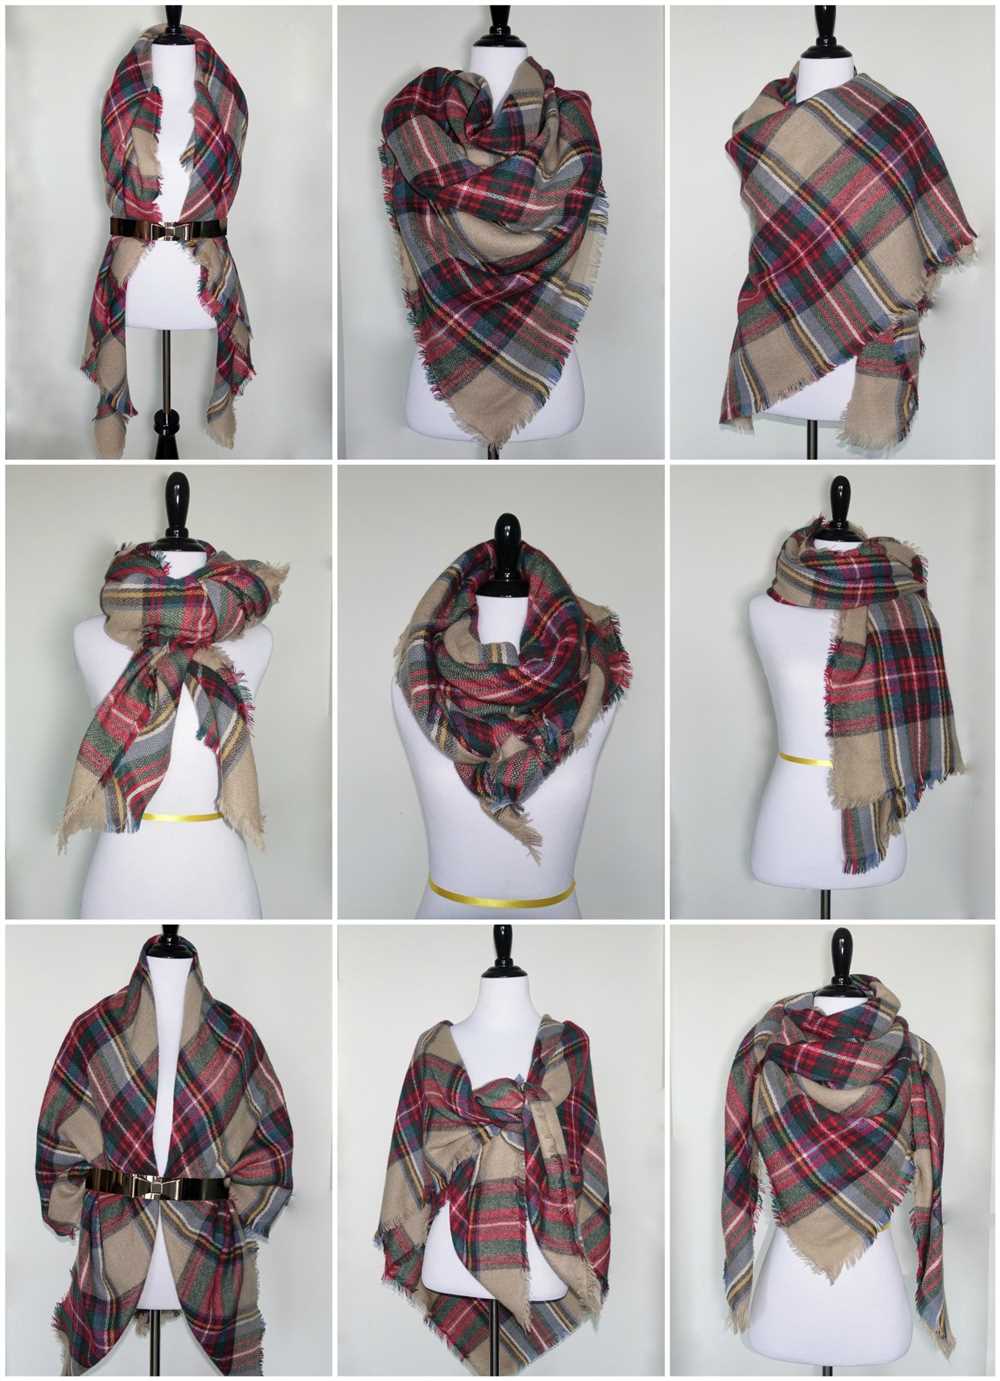 Styling a Blanket Scarf for Any Occasion